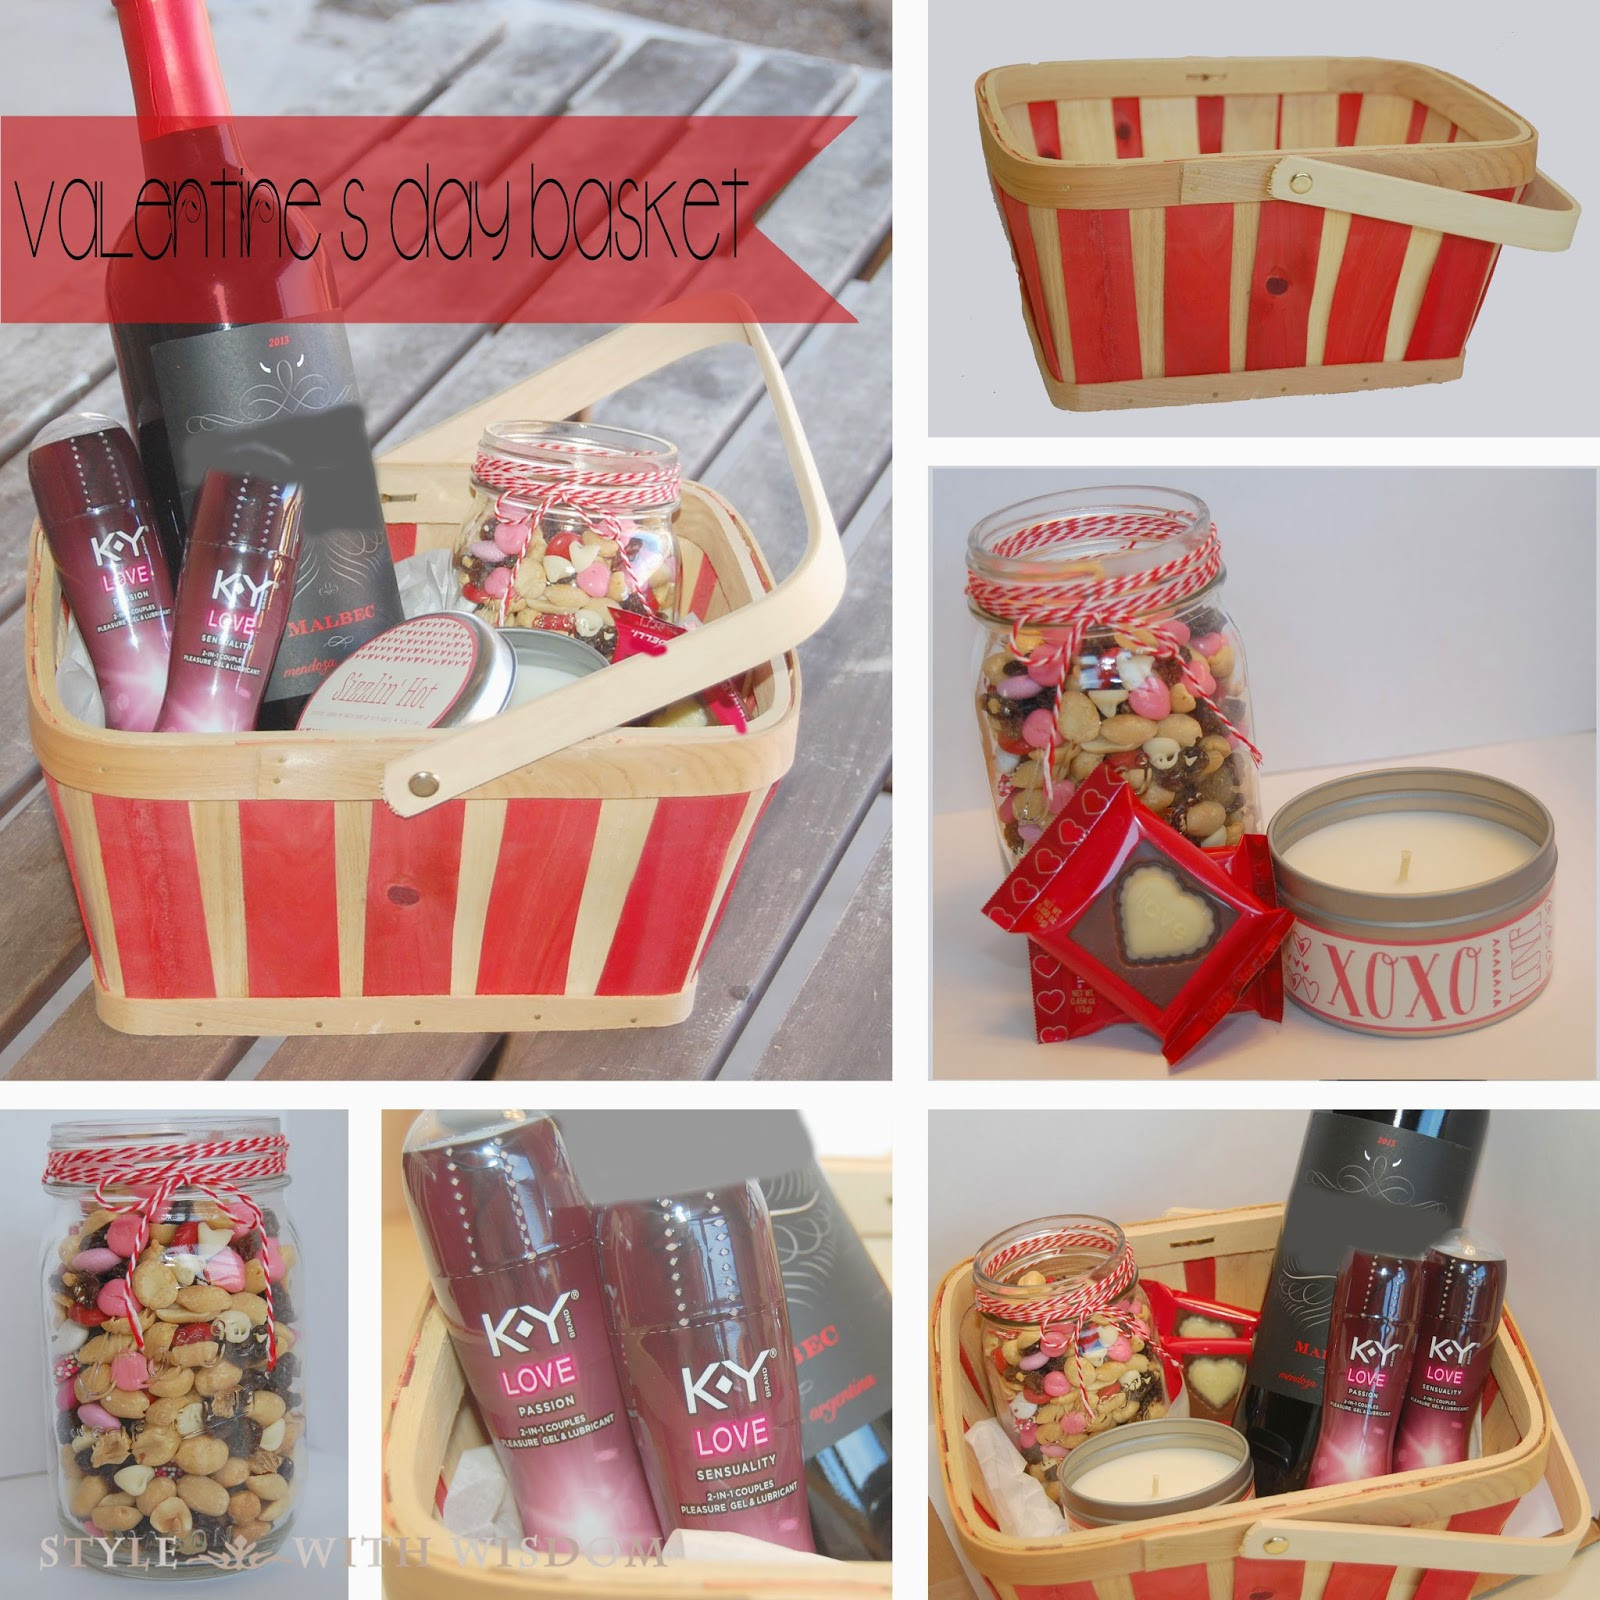 Valentines Day Gift Baskets
 Style with Wisdom The Perfect Valentine s Day Gift Basket